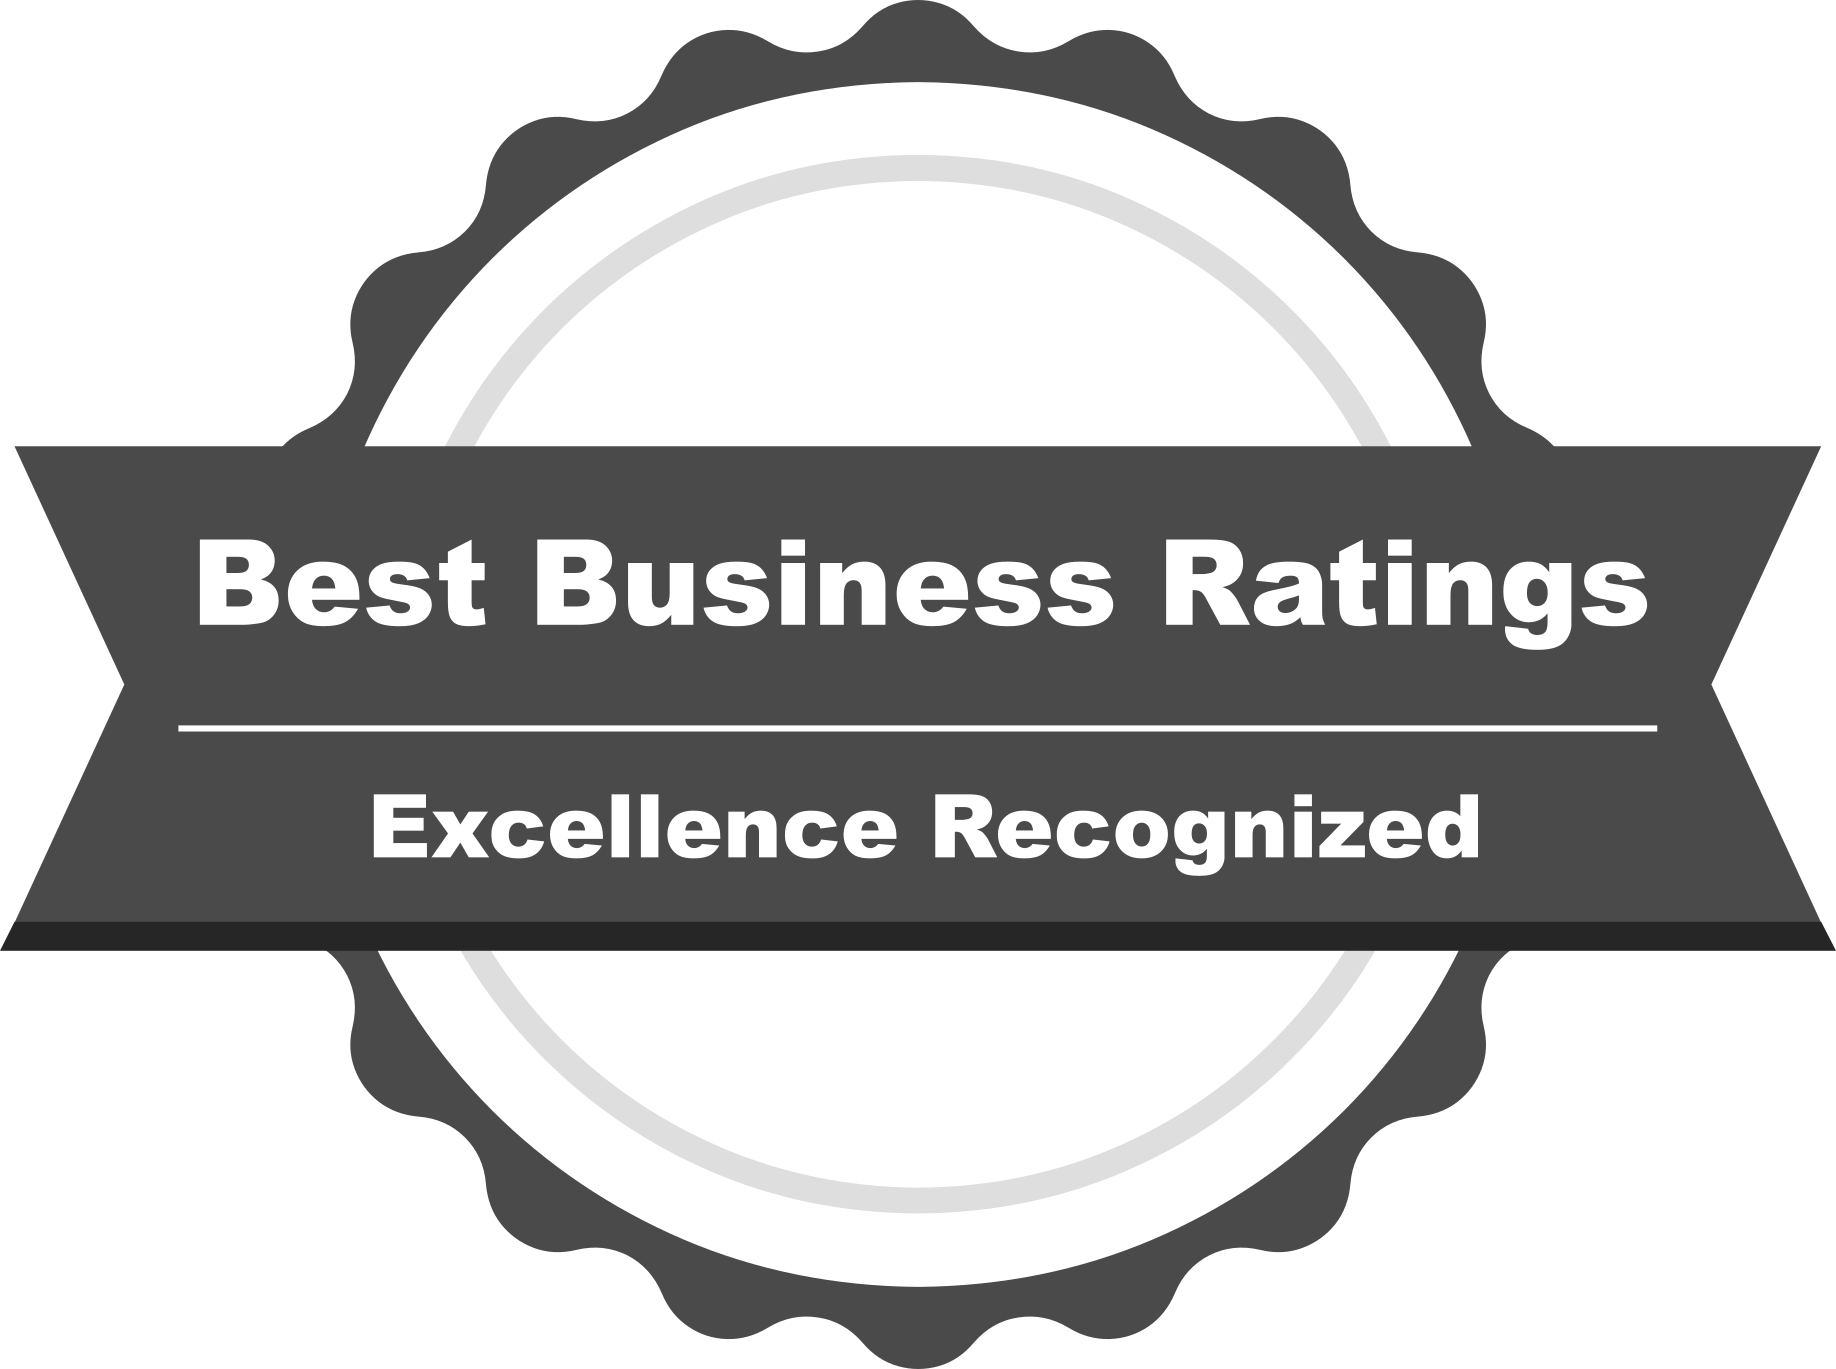 Best Business Ratings